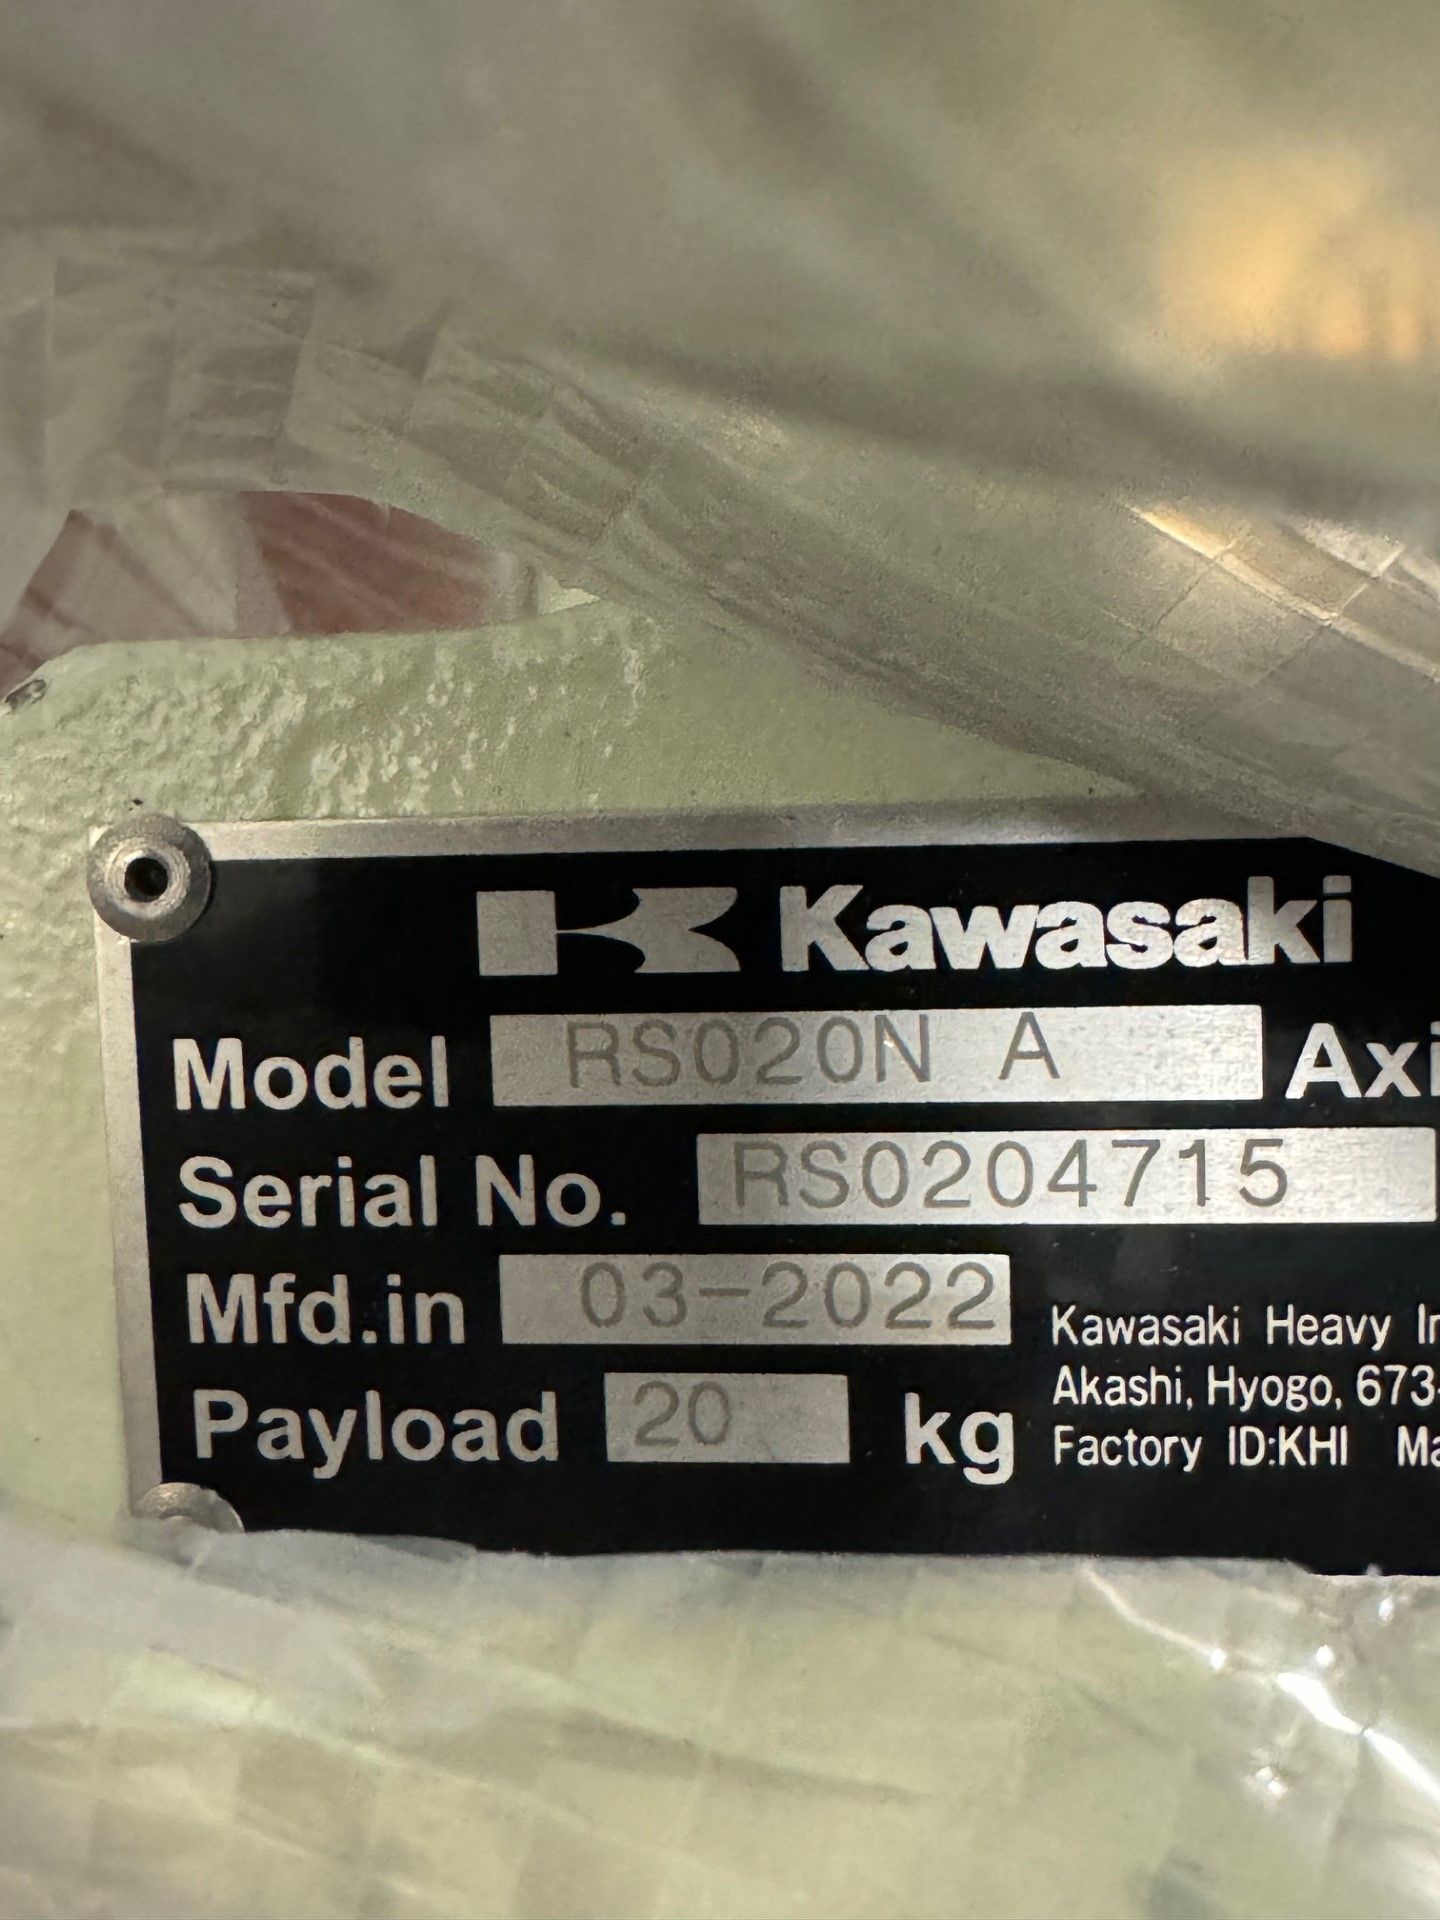 NEW KAWASAKI ROBOT MODEL RS020N, SN 4715, 20KG X 1725MM REACH WITH EO1 CONTROLS, CABLES & TEACH - Image 7 of 7